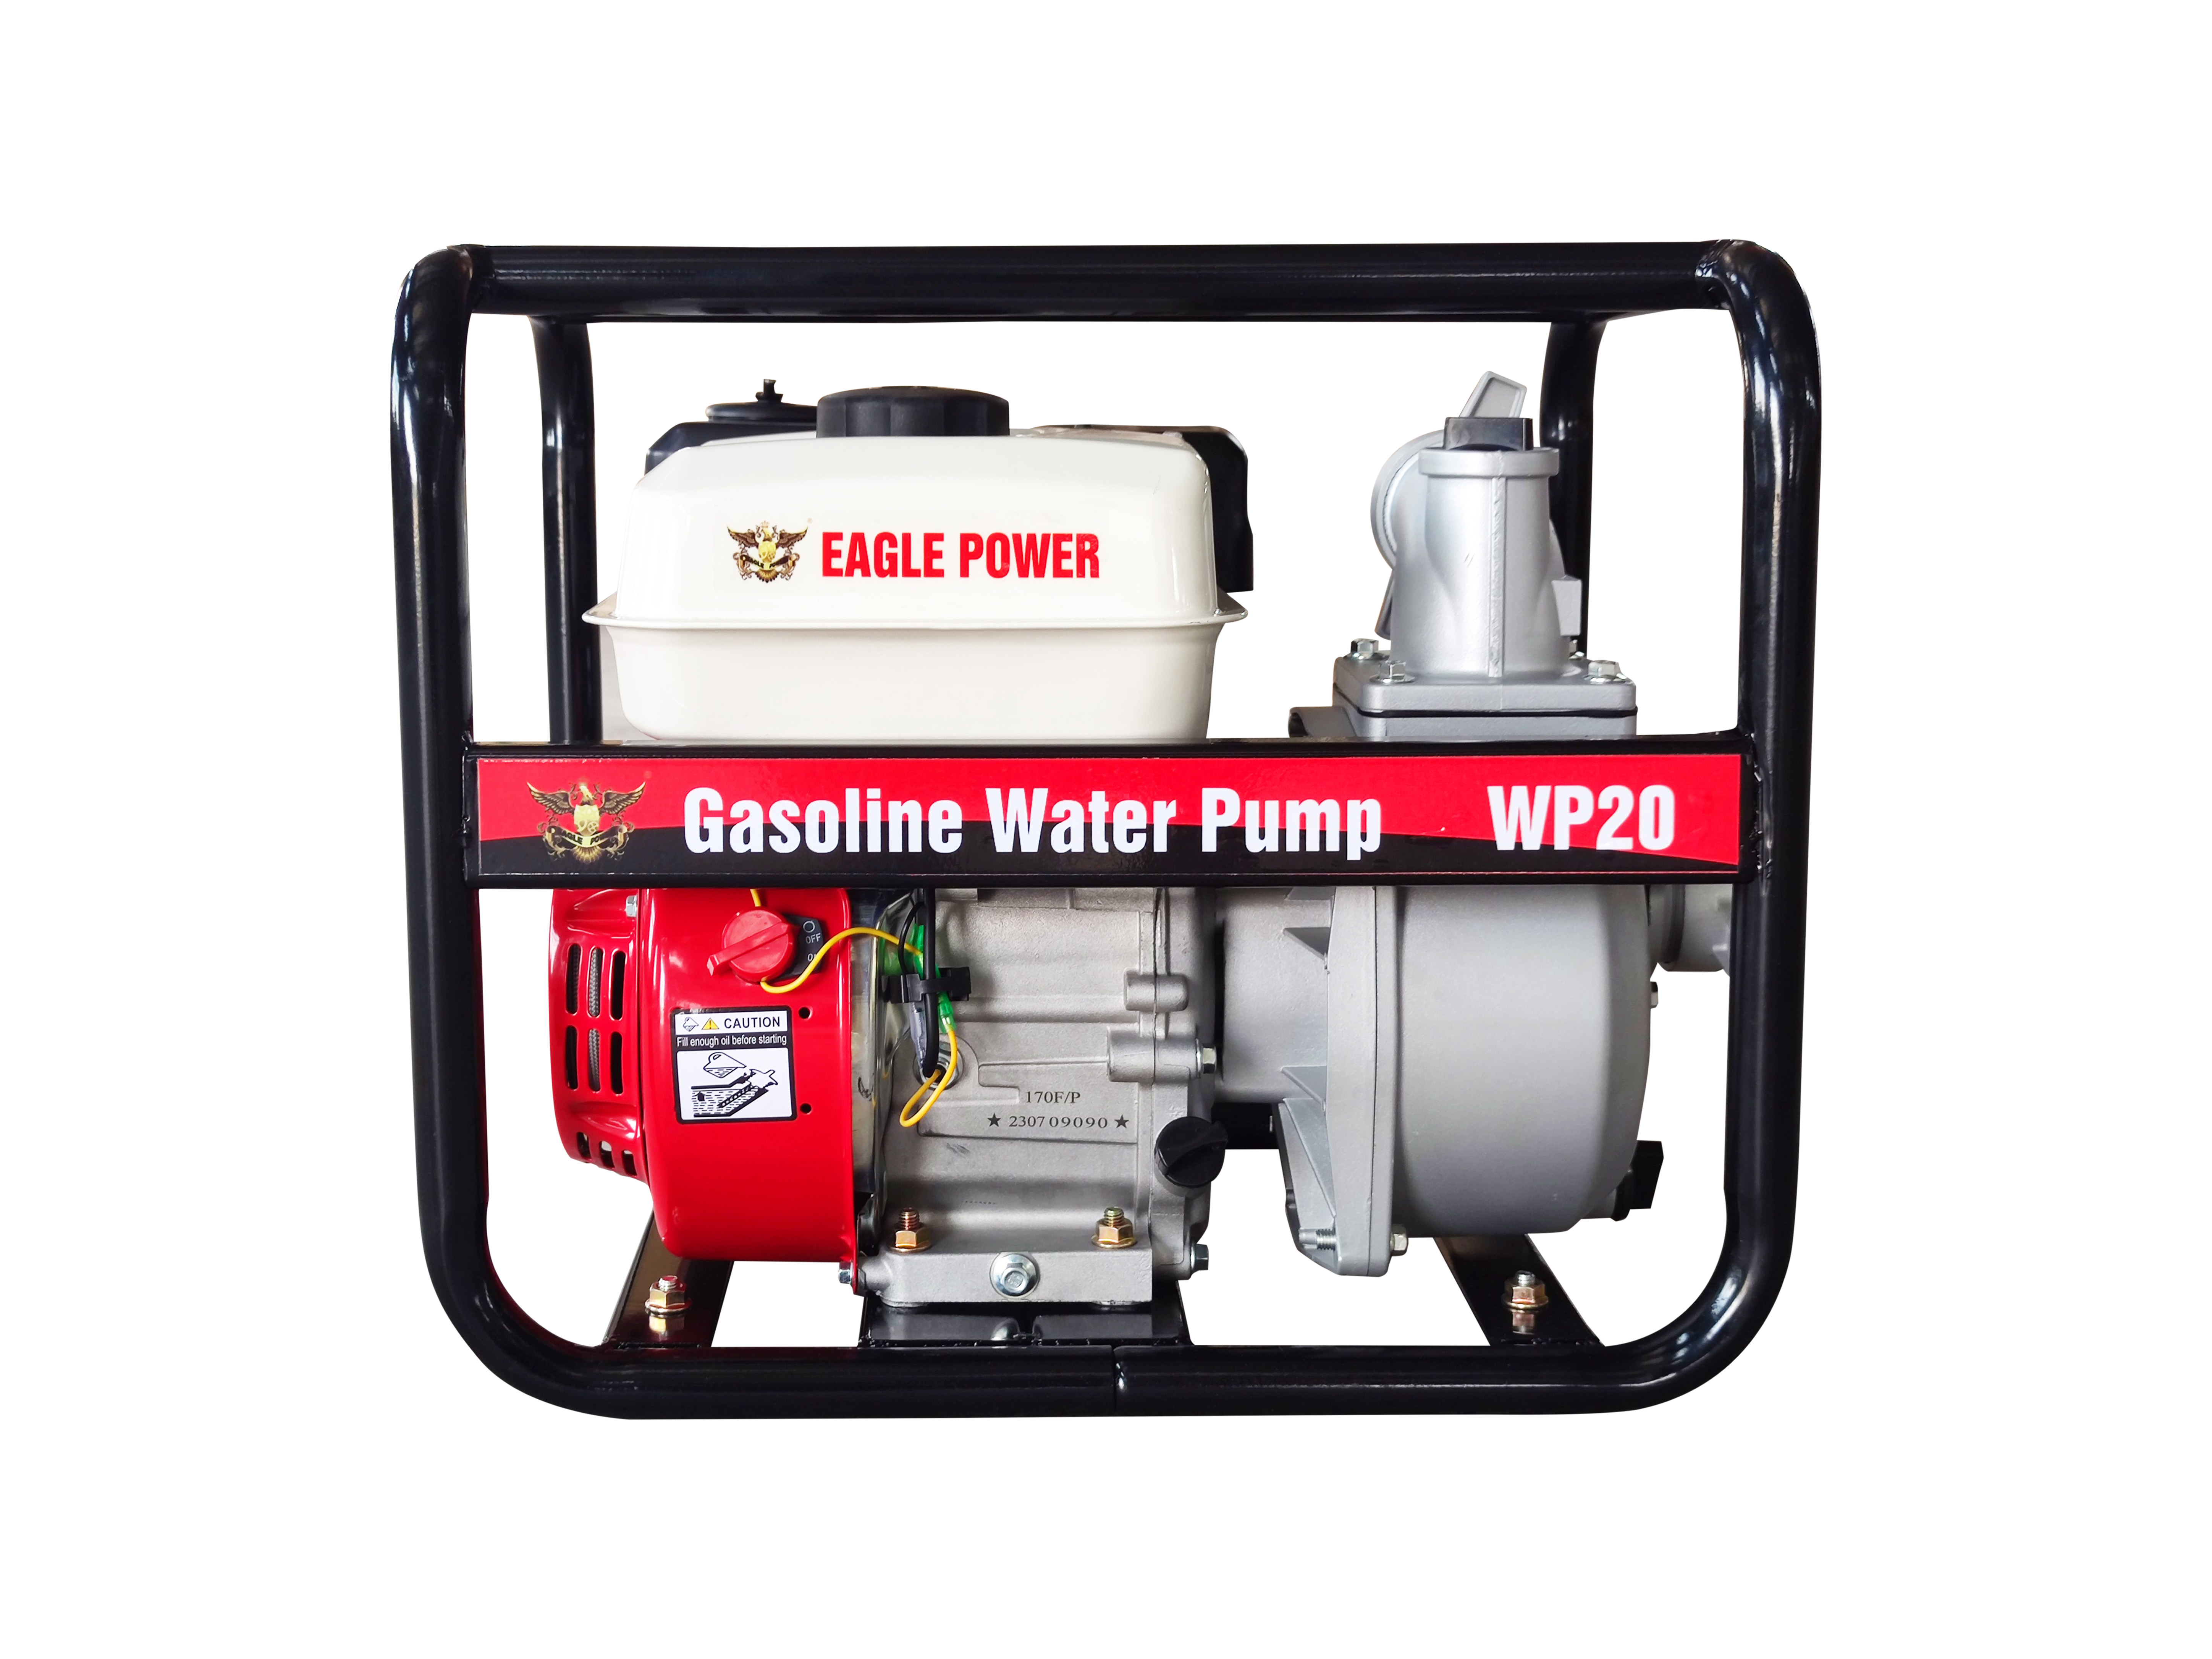 The working principle and advantages of gasoline water pumps